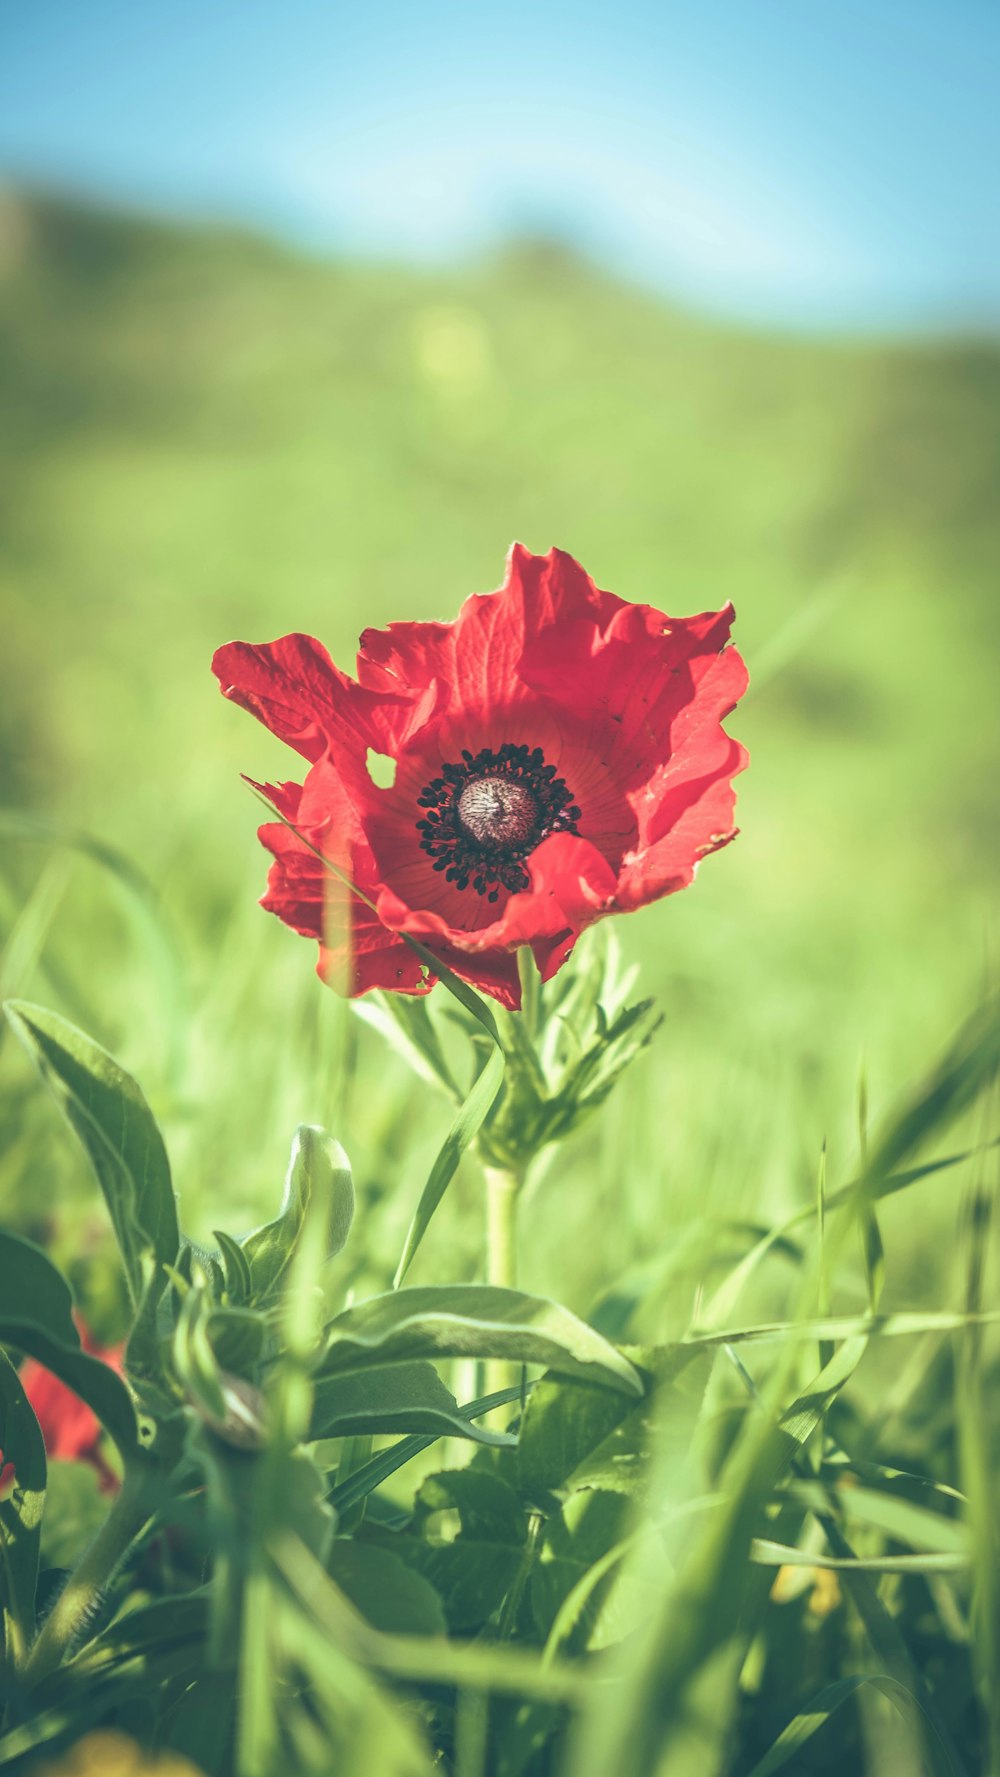 red flower in green grass during daytime